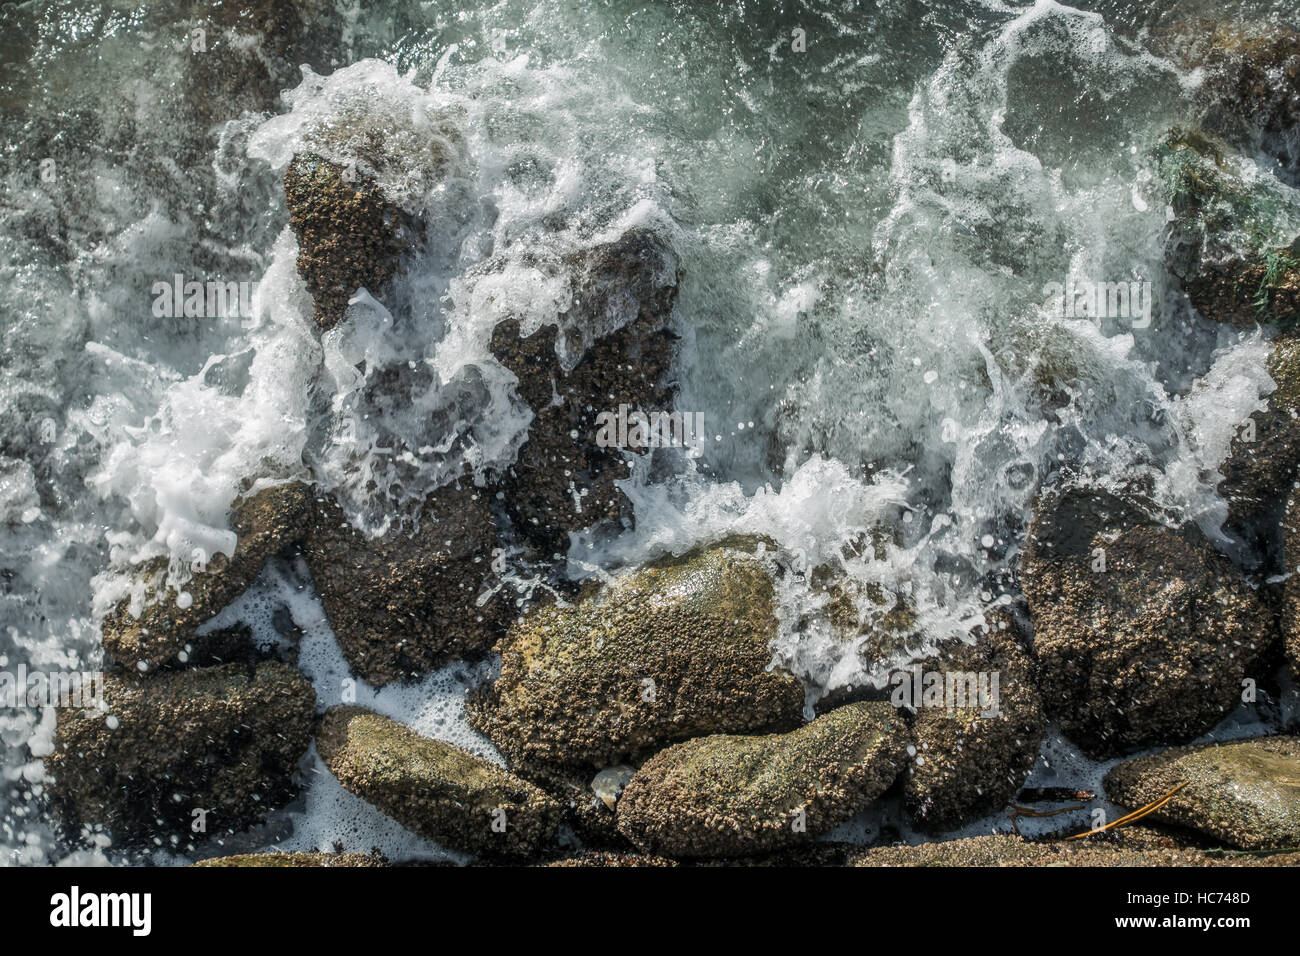 Surf crashes against barnacle-encrusted rocks resulting in whitewater explosions. Stock Photo